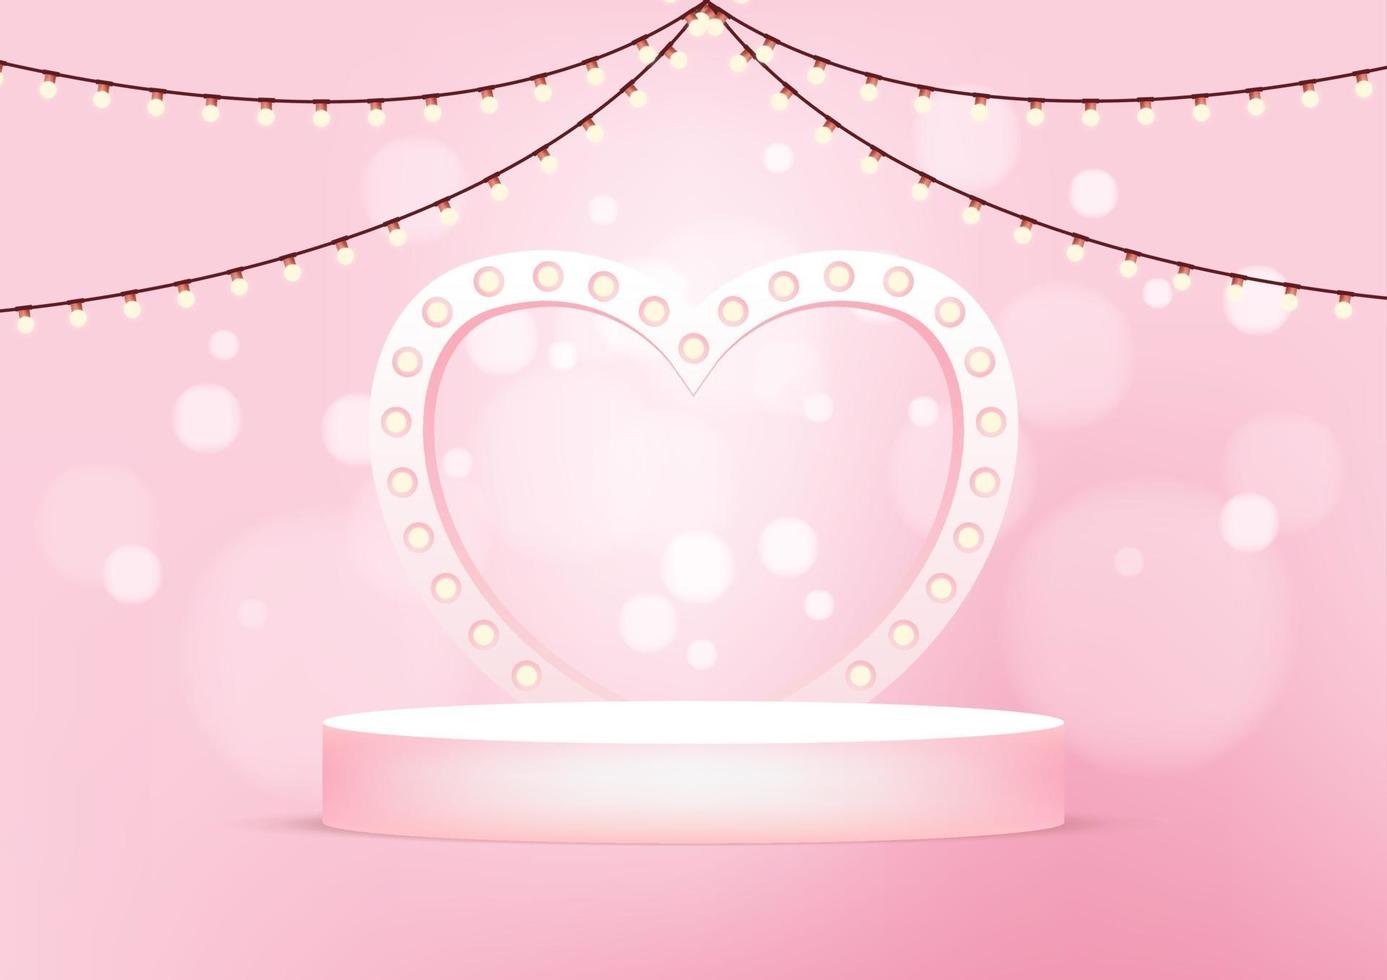 Empty round stage with heart shaped arch illuminated by light bulbs. pink studio background for product display. vector